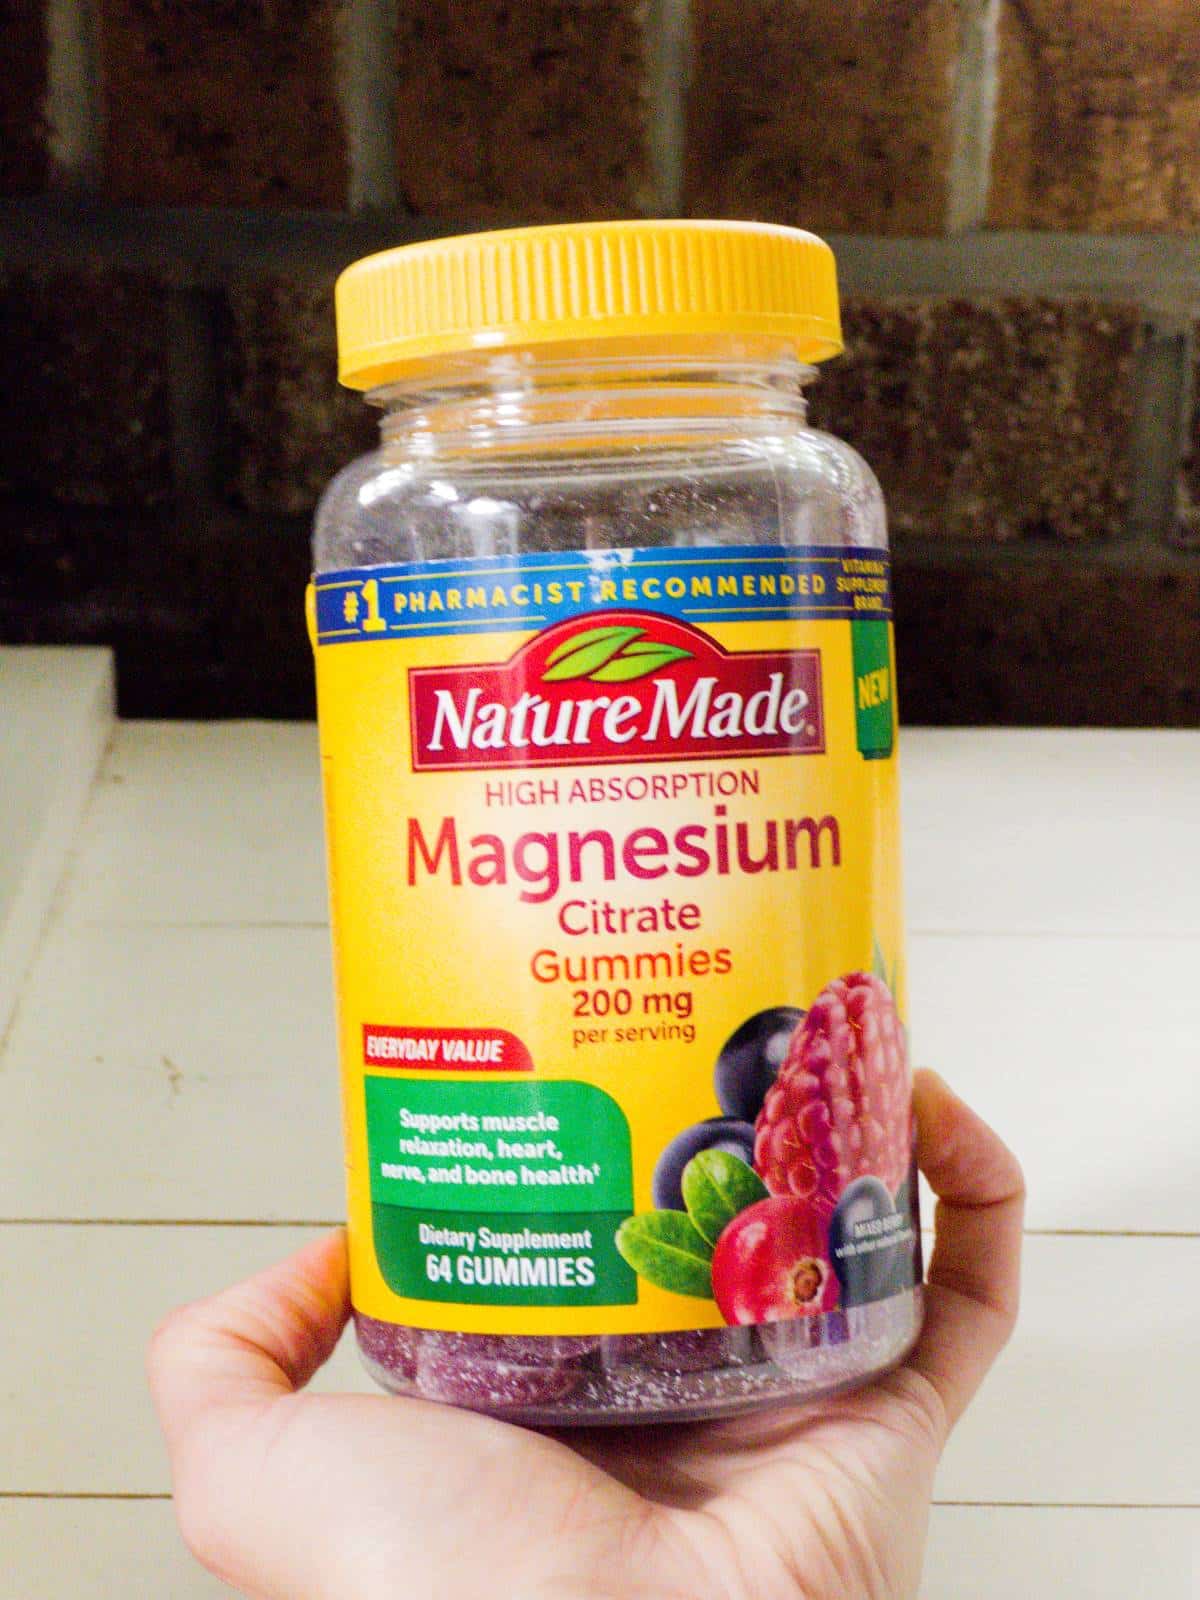 The blog author's hand holding a bottle of Magnesium Citrate Gummies supplements.